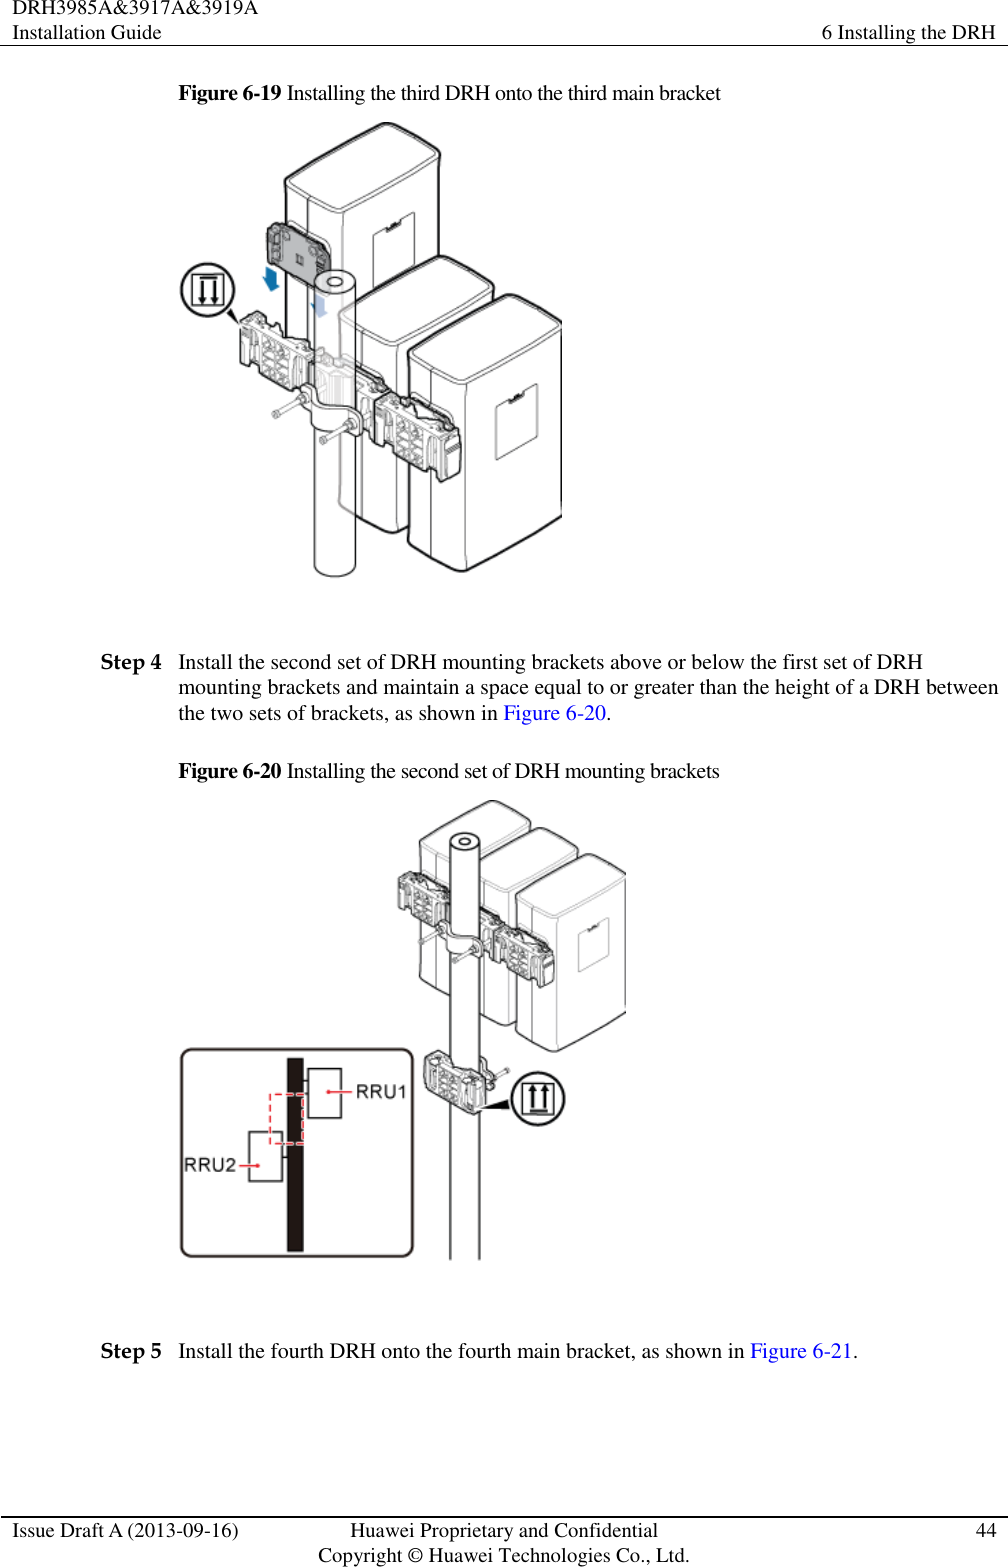 DRH3985A&amp;3917A&amp;3919A Installation Guide 6 Installing the DRH  Issue Draft A (2013-09-16) Huawei Proprietary and Confidential                                     Copyright © Huawei Technologies Co., Ltd. 44  Figure 6-19 Installing the third DRH onto the third main bracket   Step 4 Install the second set of DRH mounting brackets above or below the first set of DRH mounting brackets and maintain a space equal to or greater than the height of a DRH between the two sets of brackets, as shown in Figure 6-20. Figure 6-20 Installing the second set of DRH mounting brackets   Step 5 Install the fourth DRH onto the fourth main bracket, as shown in Figure 6-21. 